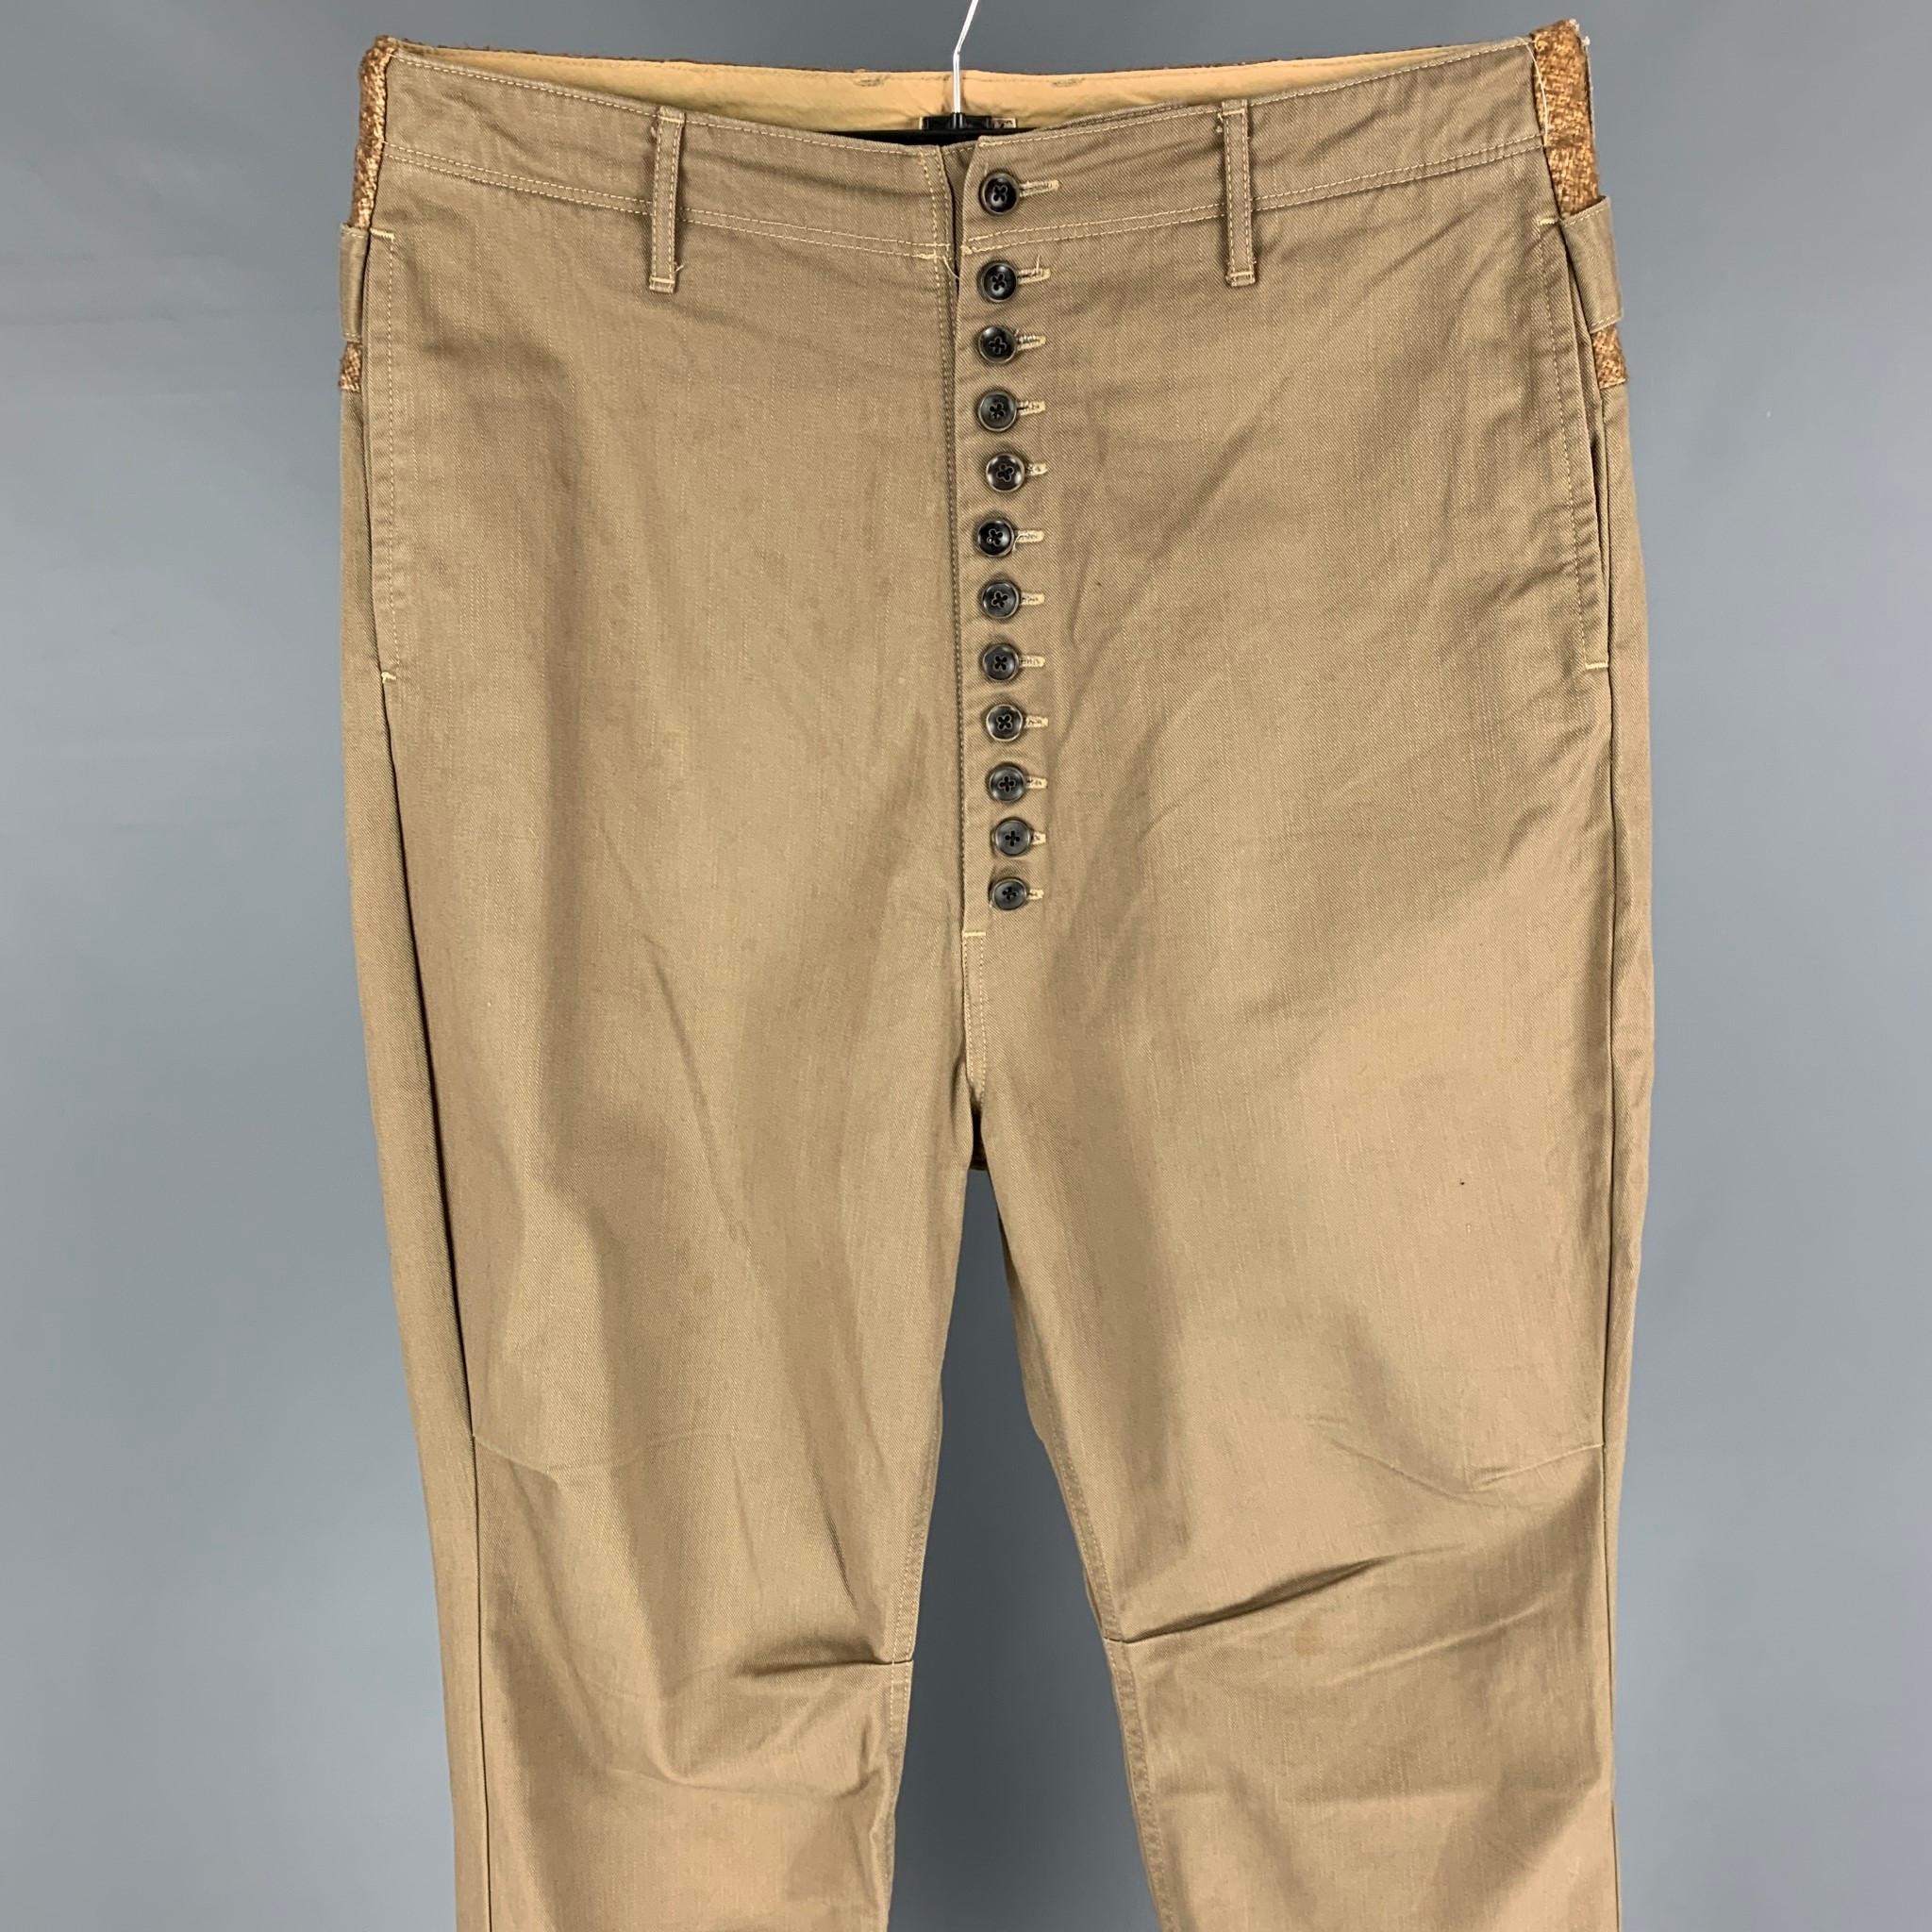 KAPITAL casual pants comes in a khaki cotton featuring a high waisted style, slim fit, wool panel, back strap detail, contrast stitching, and a button fly closure. 

Good Pre-Owned Condition. Discoloration at front.
Marked: 3

Measurements:

Waist: